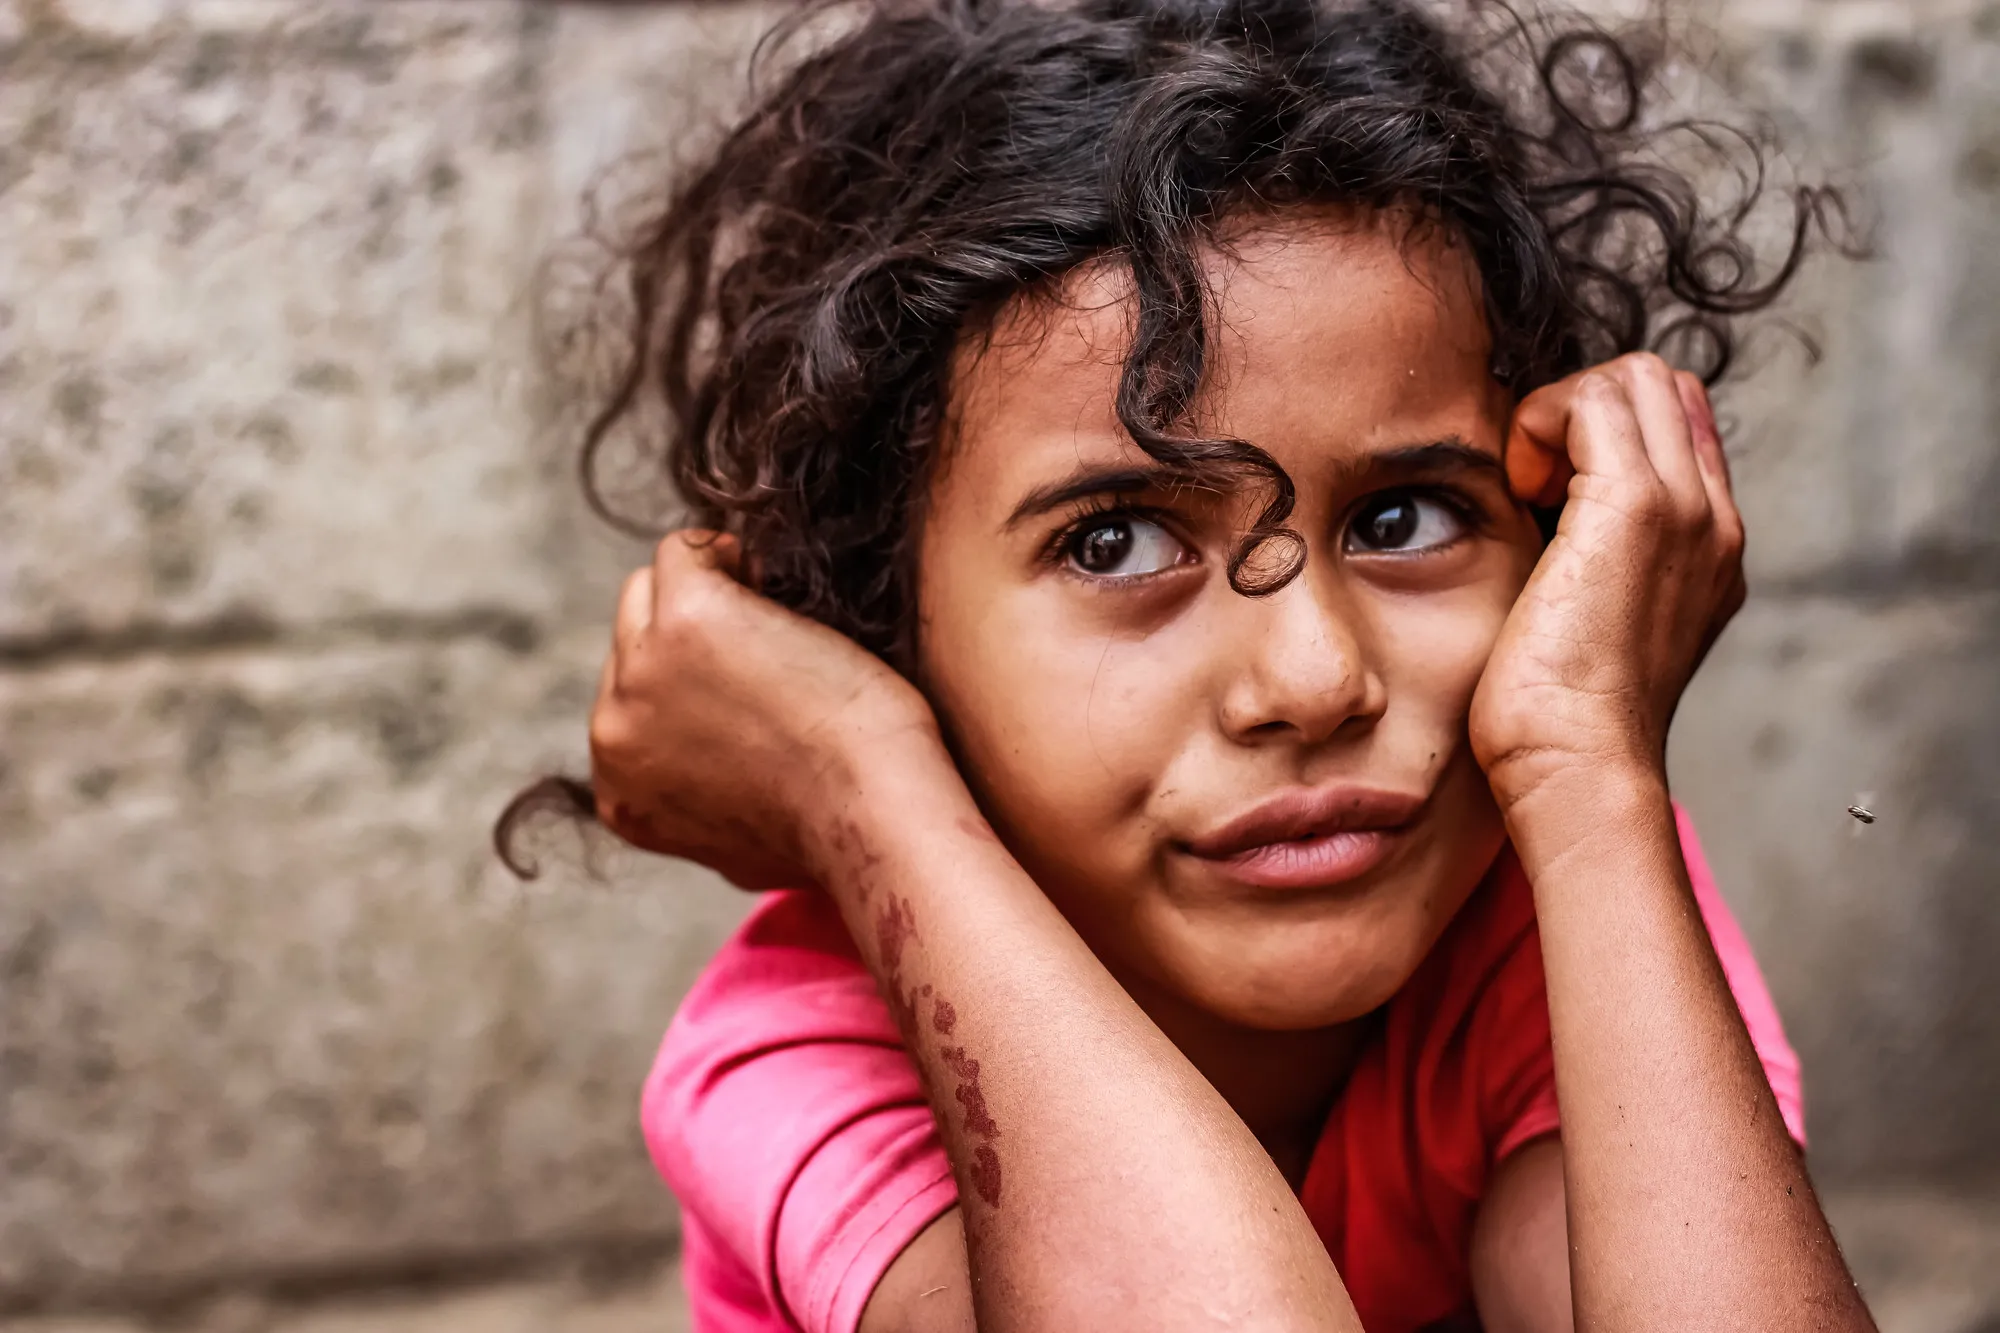 A young girl holds her head in her hands with a sad expression on her face.